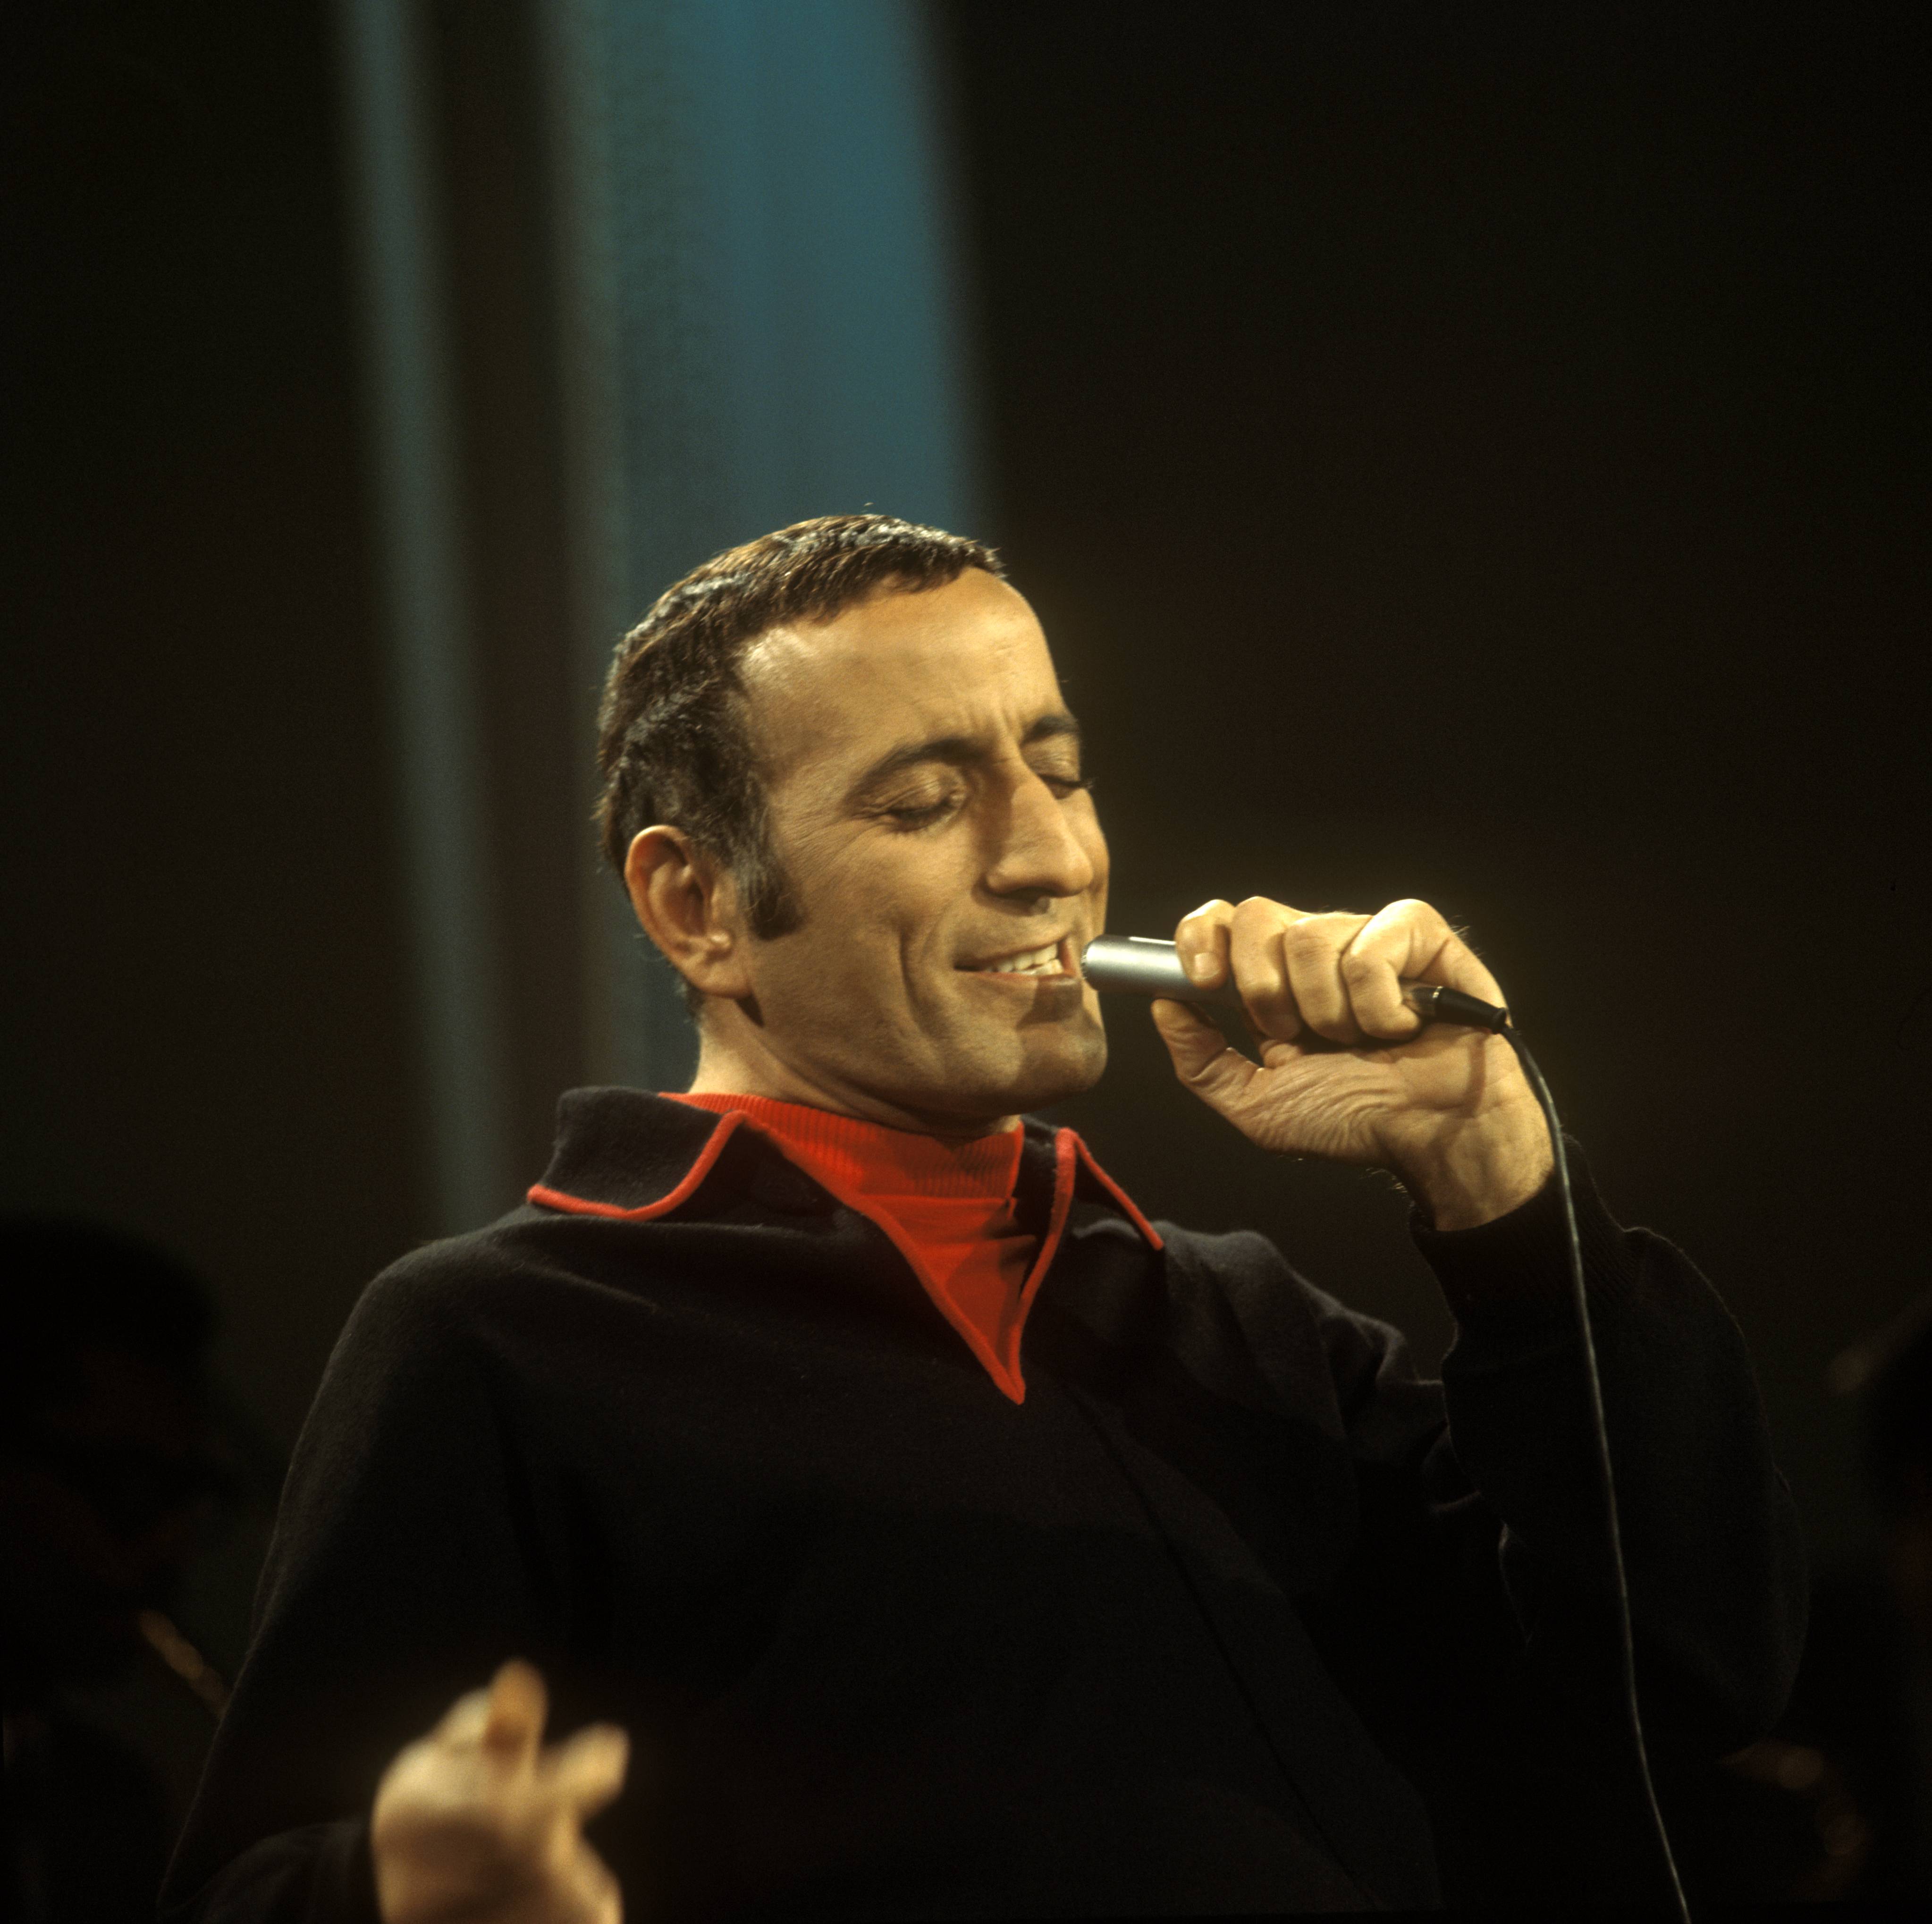 Tony Bennett performing live, circa 1962. | Source: Getty Images